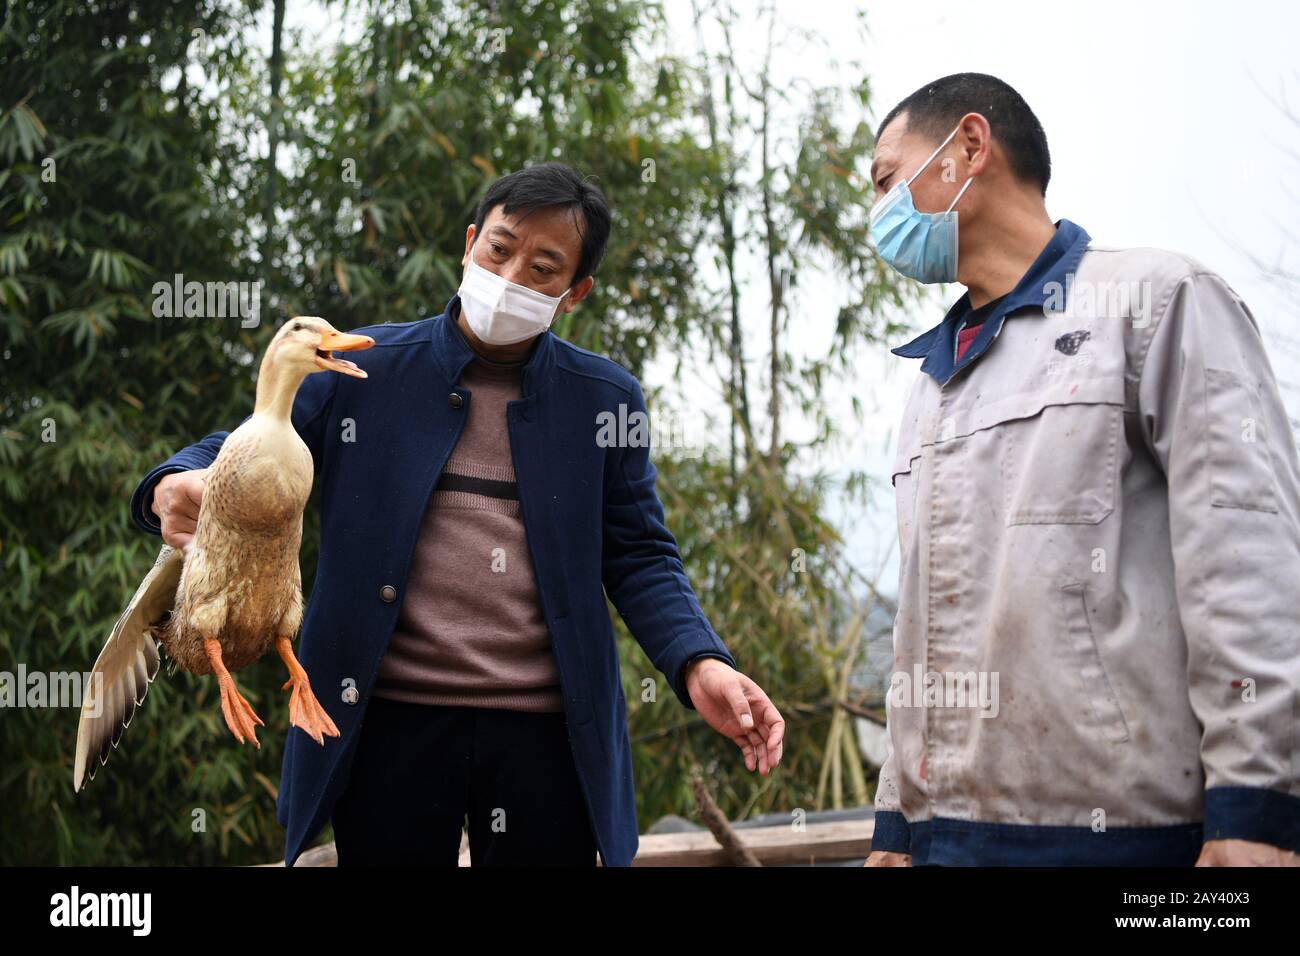 Chongqing. 14th Feb, 2020. Farmer Fu Zongyong (R) and a staff of local government check ducks at Shuangjing village of Yufengshan Town in Yubei District of southwest China's Chongqing Municipality, Feb. 14, 2020. Since the outbreak of the novel coronavirus, Fu Zongyong, a poverty-striken farmer has been unable to sell his ducks due to the closing of live poultry markets. Local authorities sent staff to help him with quarantine and sales of ducks to ensure his income during the battle against the epidemic. Credit: Tang Yi/Xinhua/Alamy Live News Stock Photo